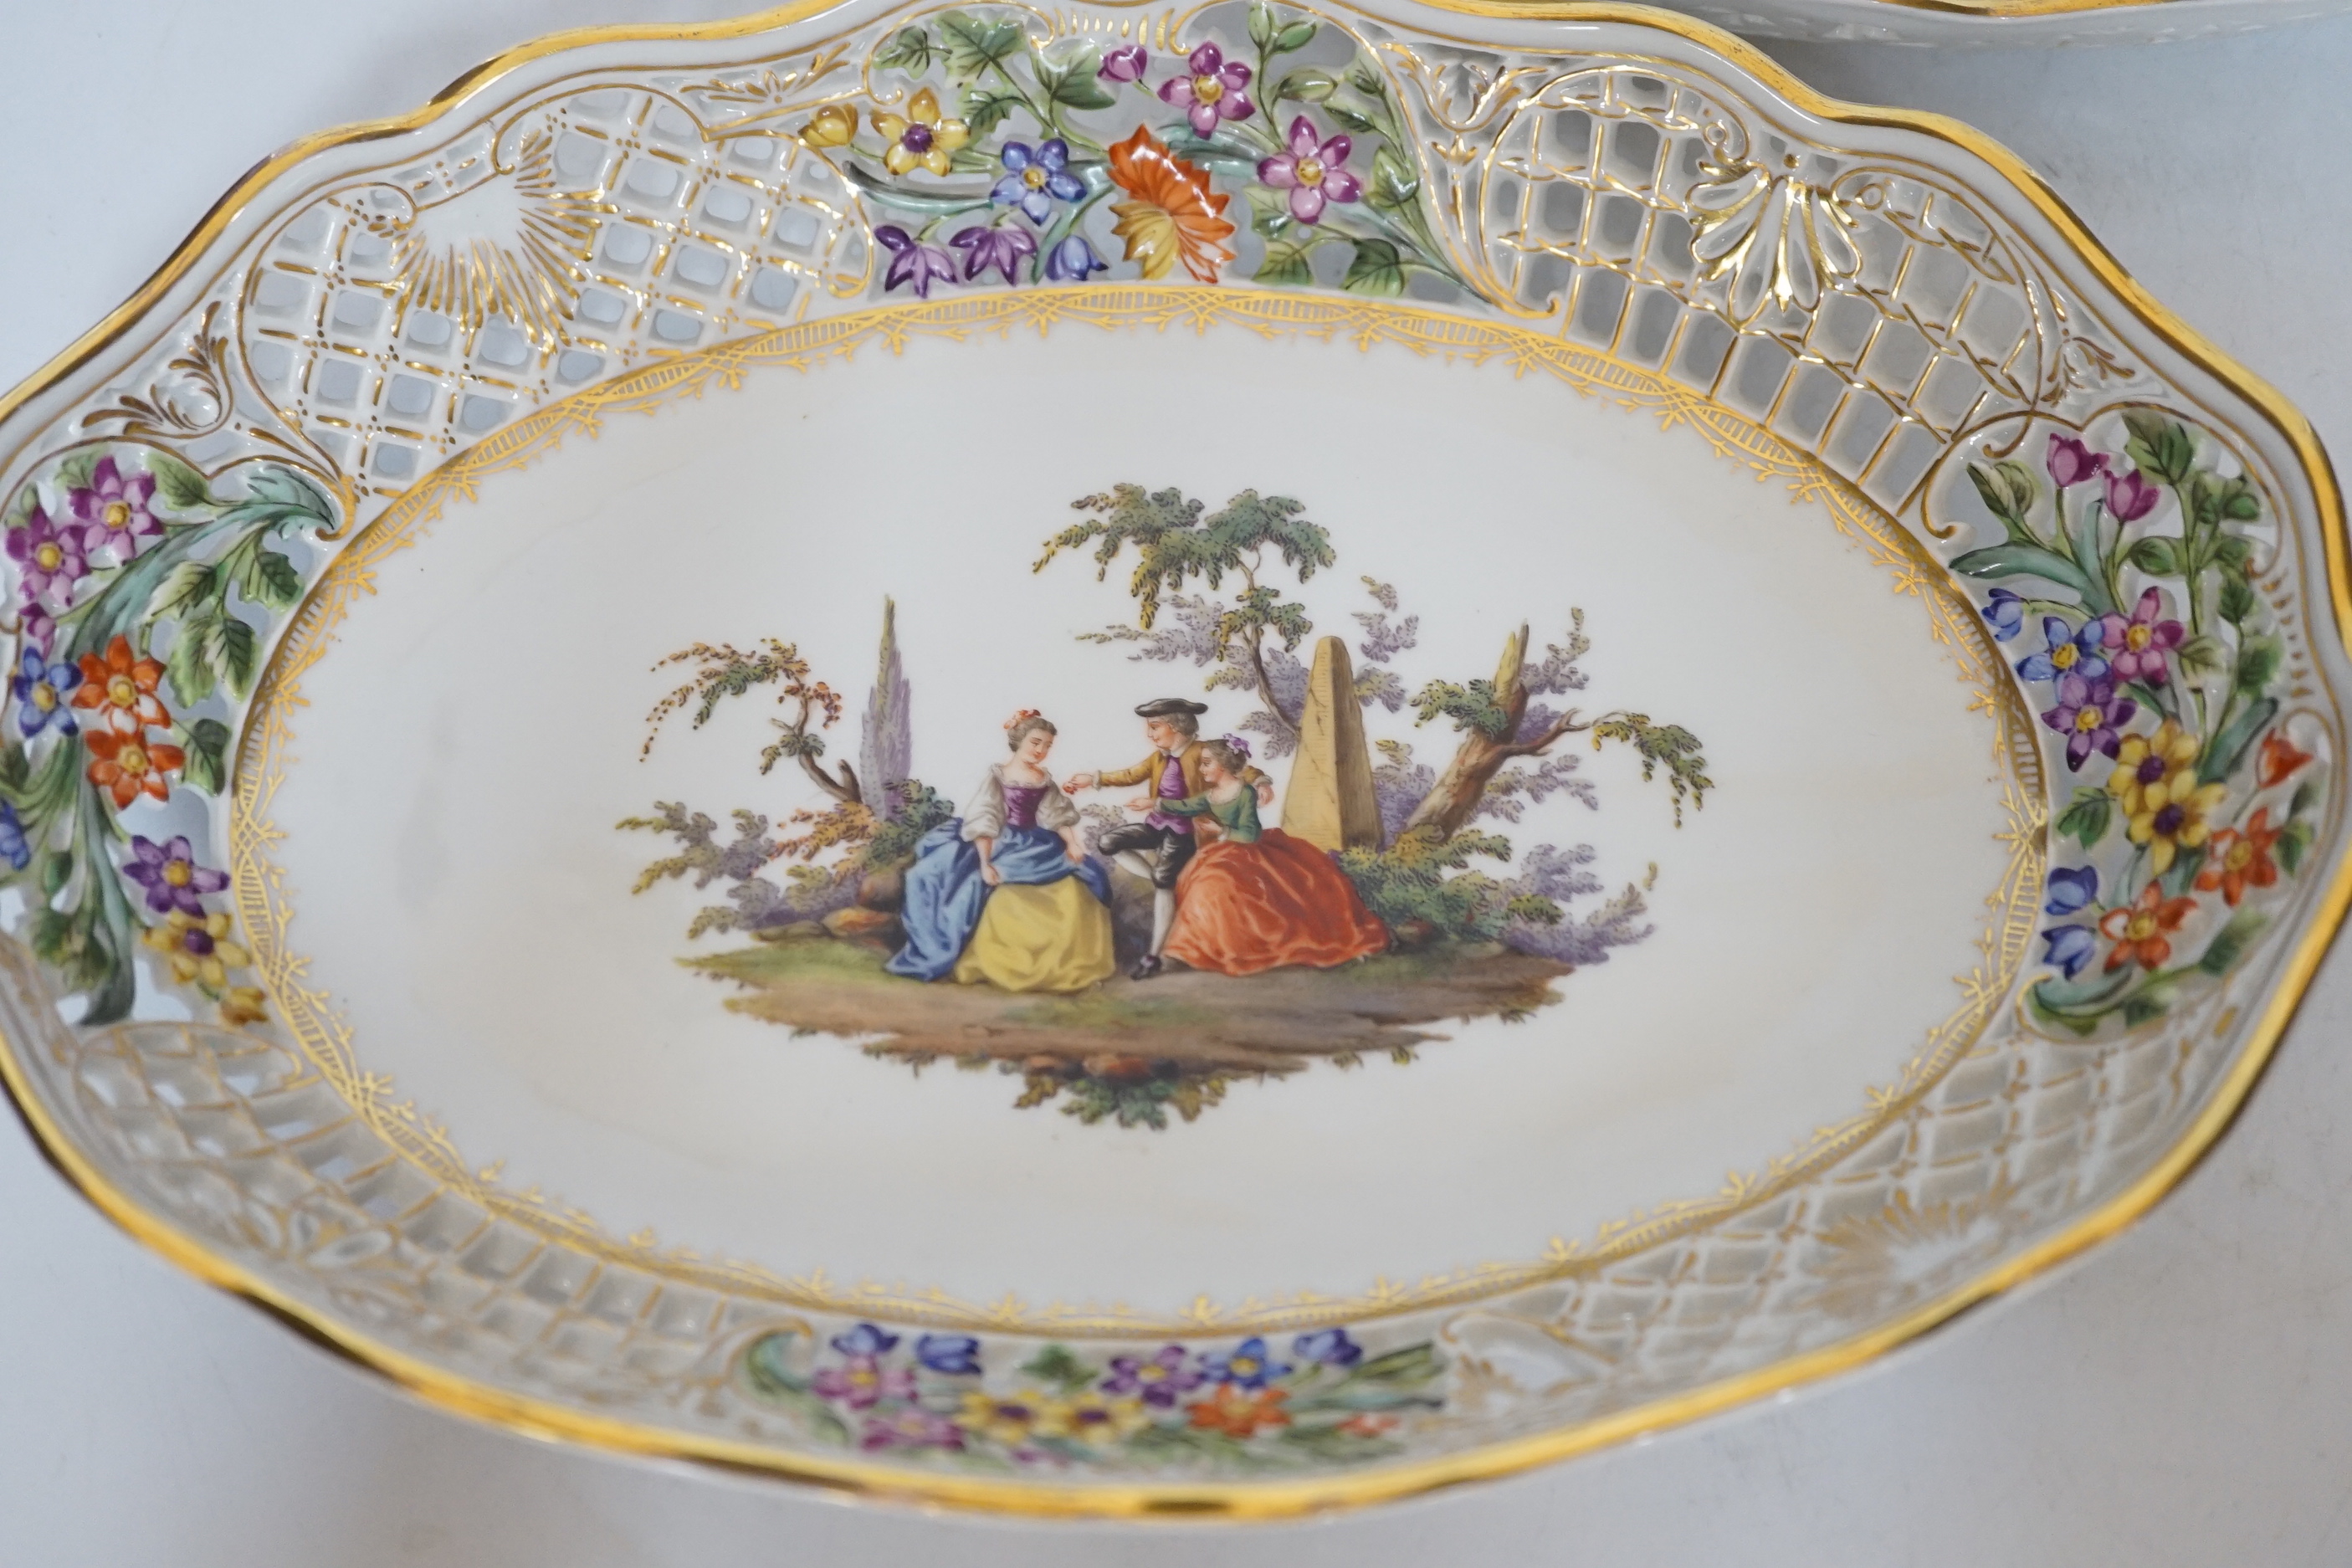 A pair of Meissen oval reticulated dishes, 28cm diameter